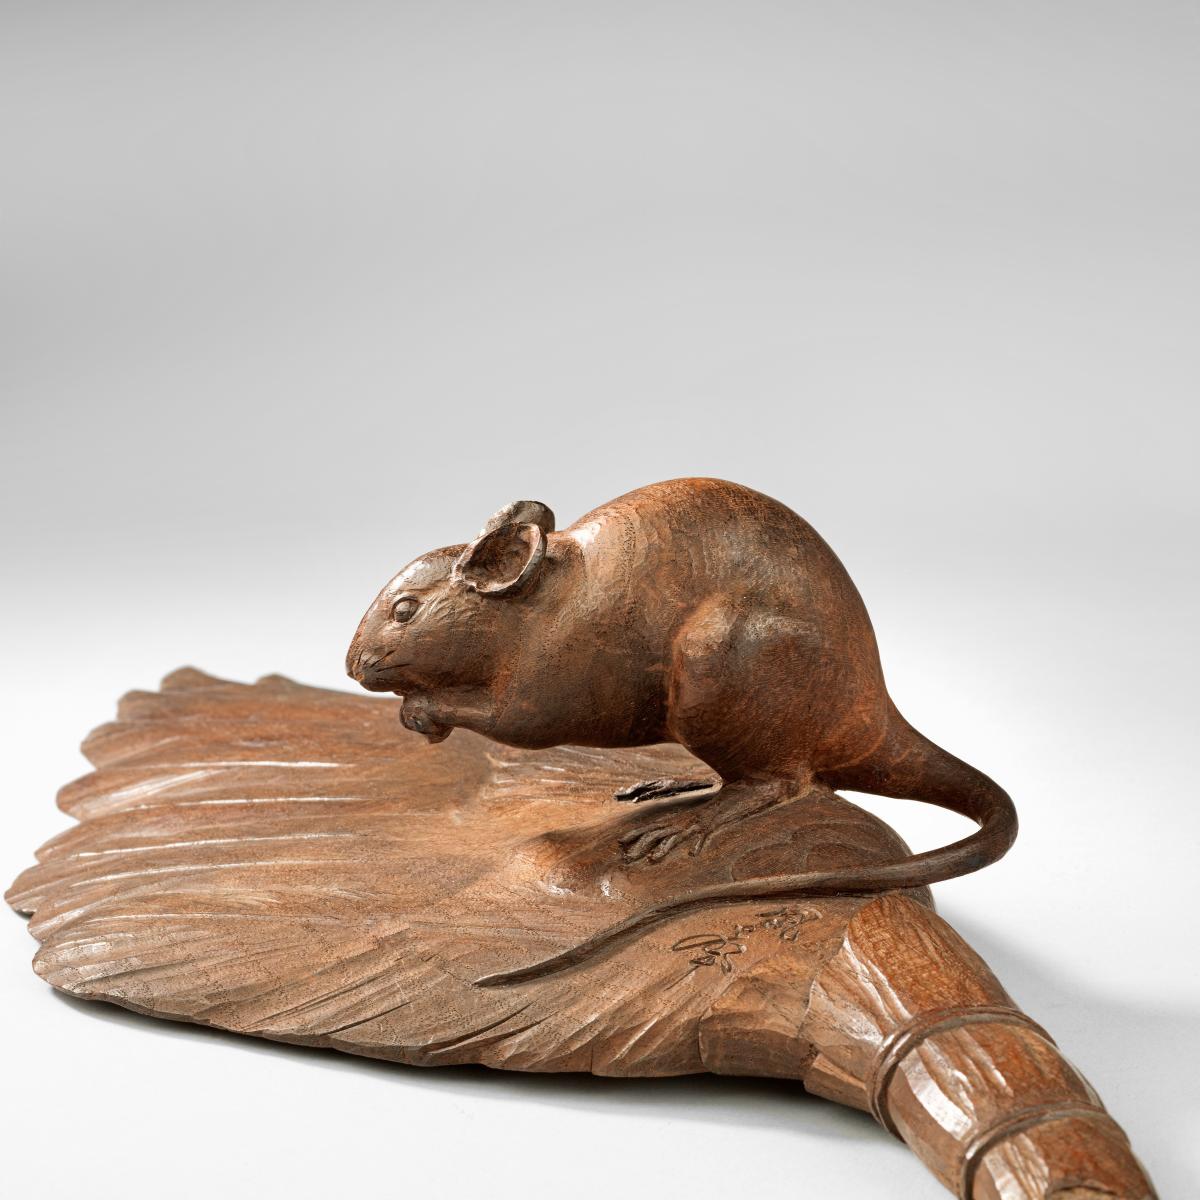 Japanese wood rat standing on a feather-brush signed Hosei, Meiji Period